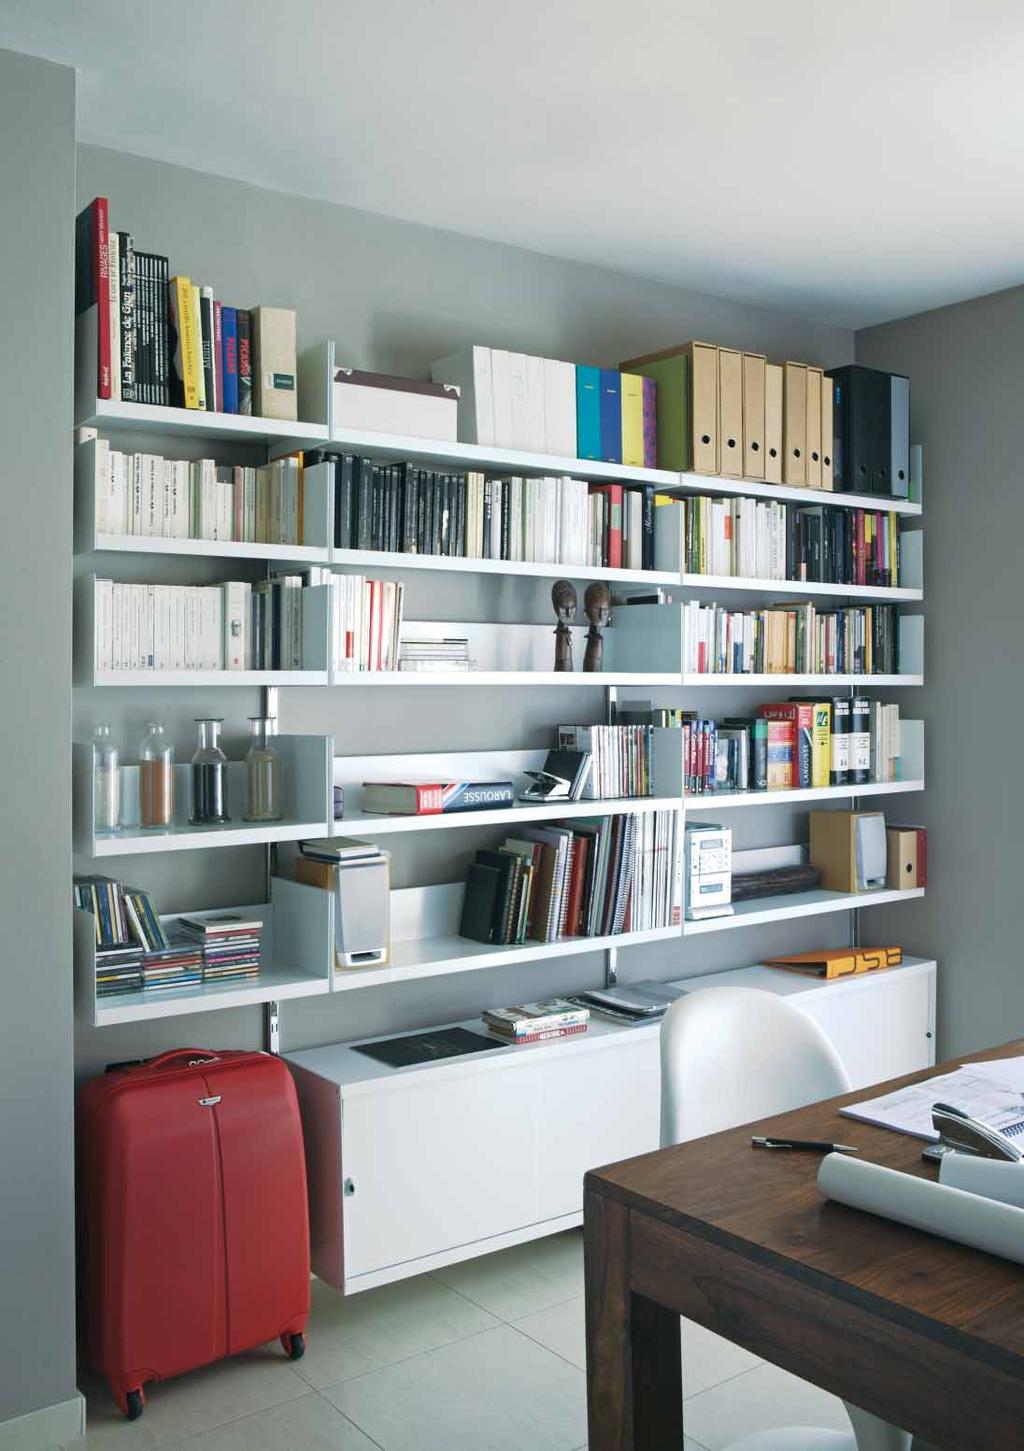 The T-99 system versatility and purity of design make this product a flexible solution for any space that requires a shelving system to store books, binder and any type of object.